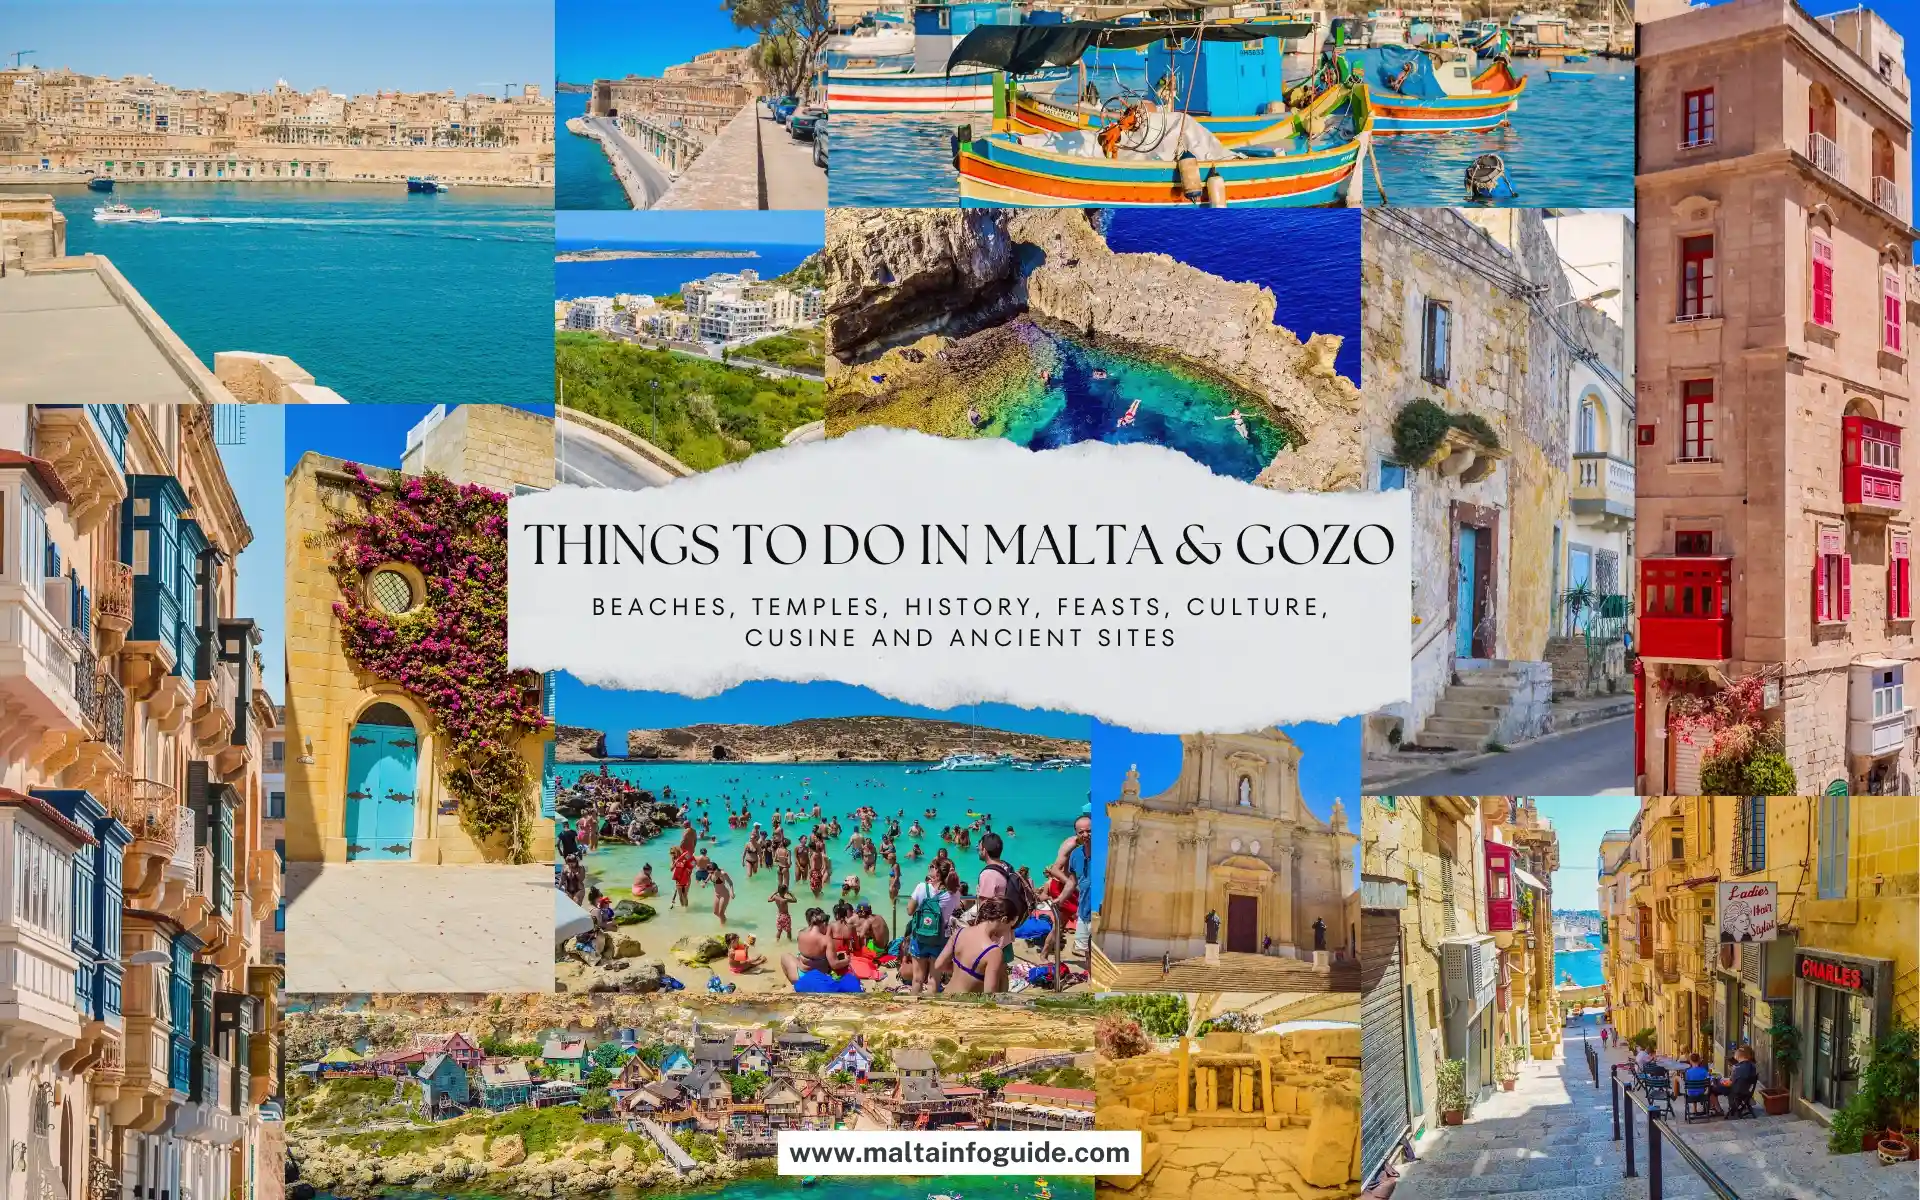 Explore the best of Malta with our curated guide to the top things to do on the island. Get a taste of what you can do for an unforgettable trip.